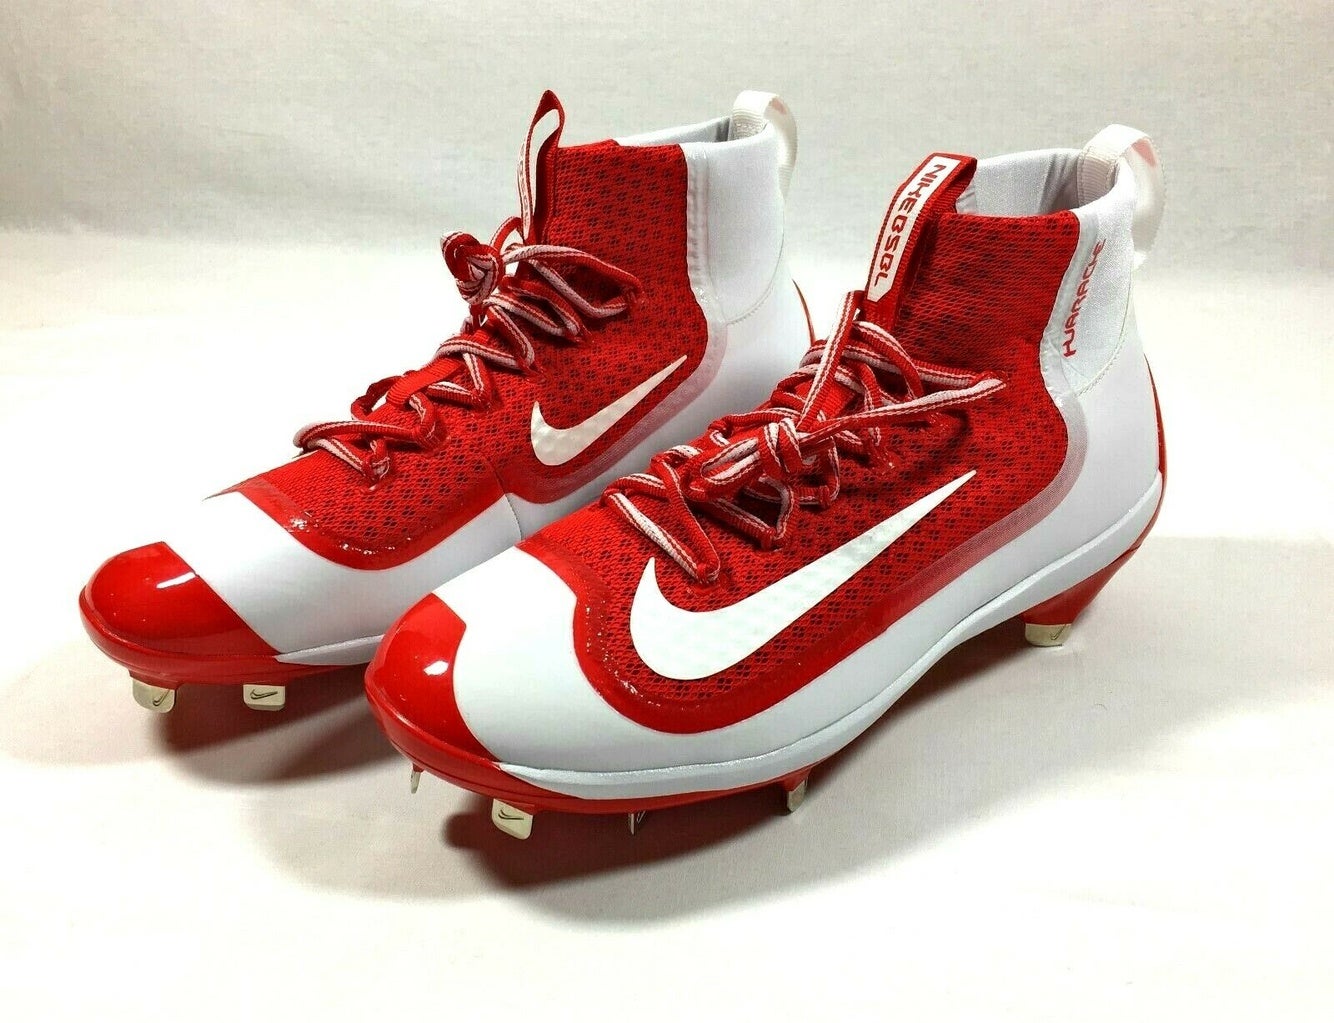 Details about   Size 14 Air Huarache 2K Filth Elite Low Red/White Football Cleats Shoes 